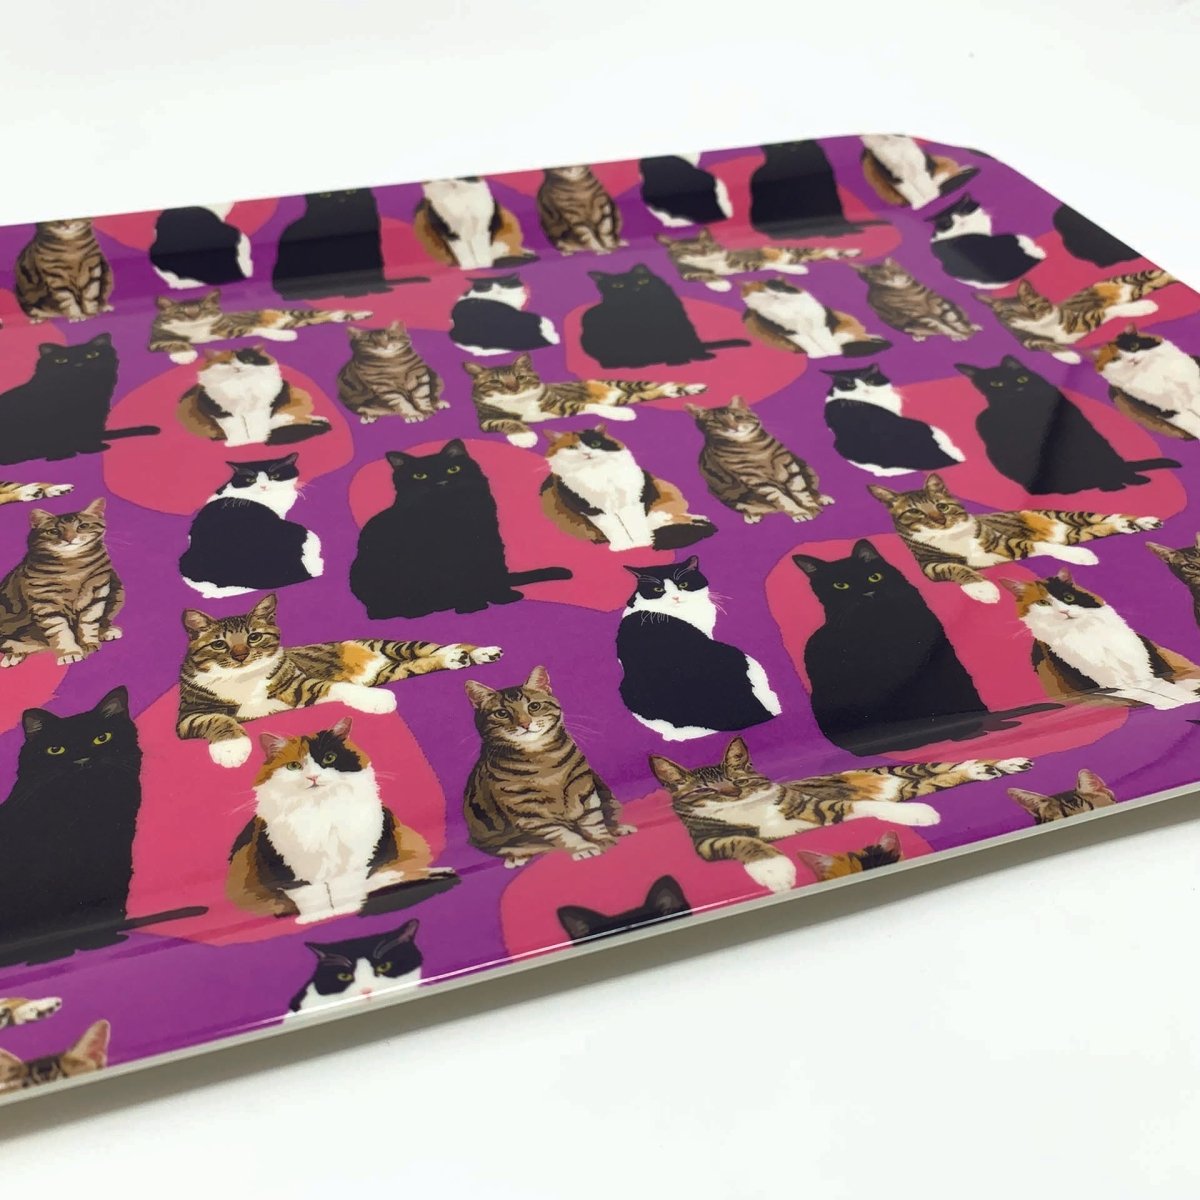 Cat Patterned Tray by Leslie Gerry